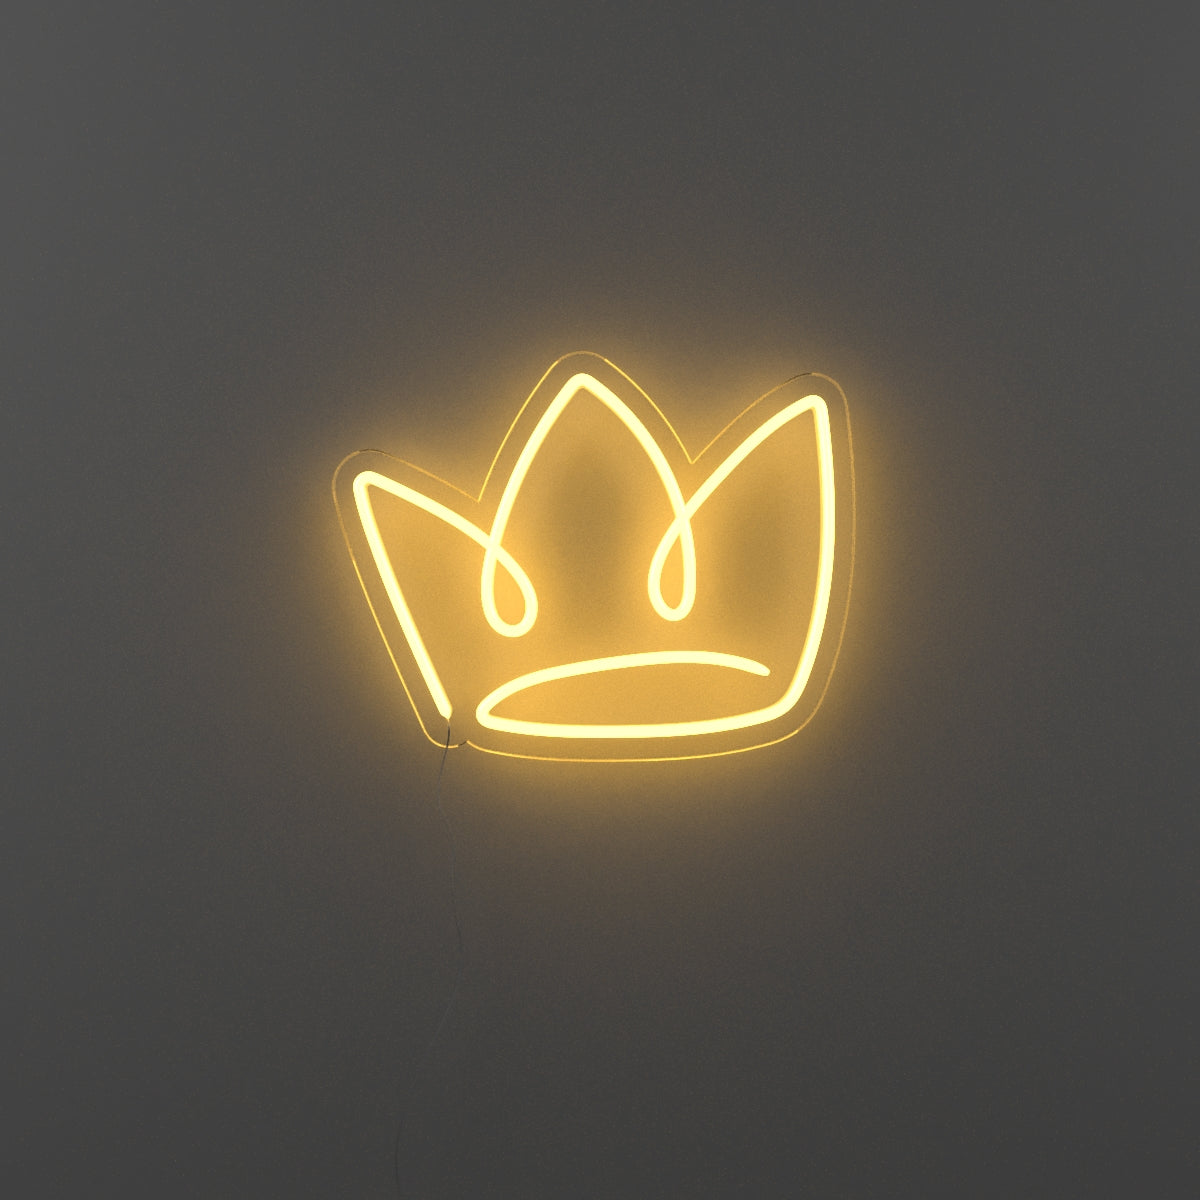 The Crown neon sign